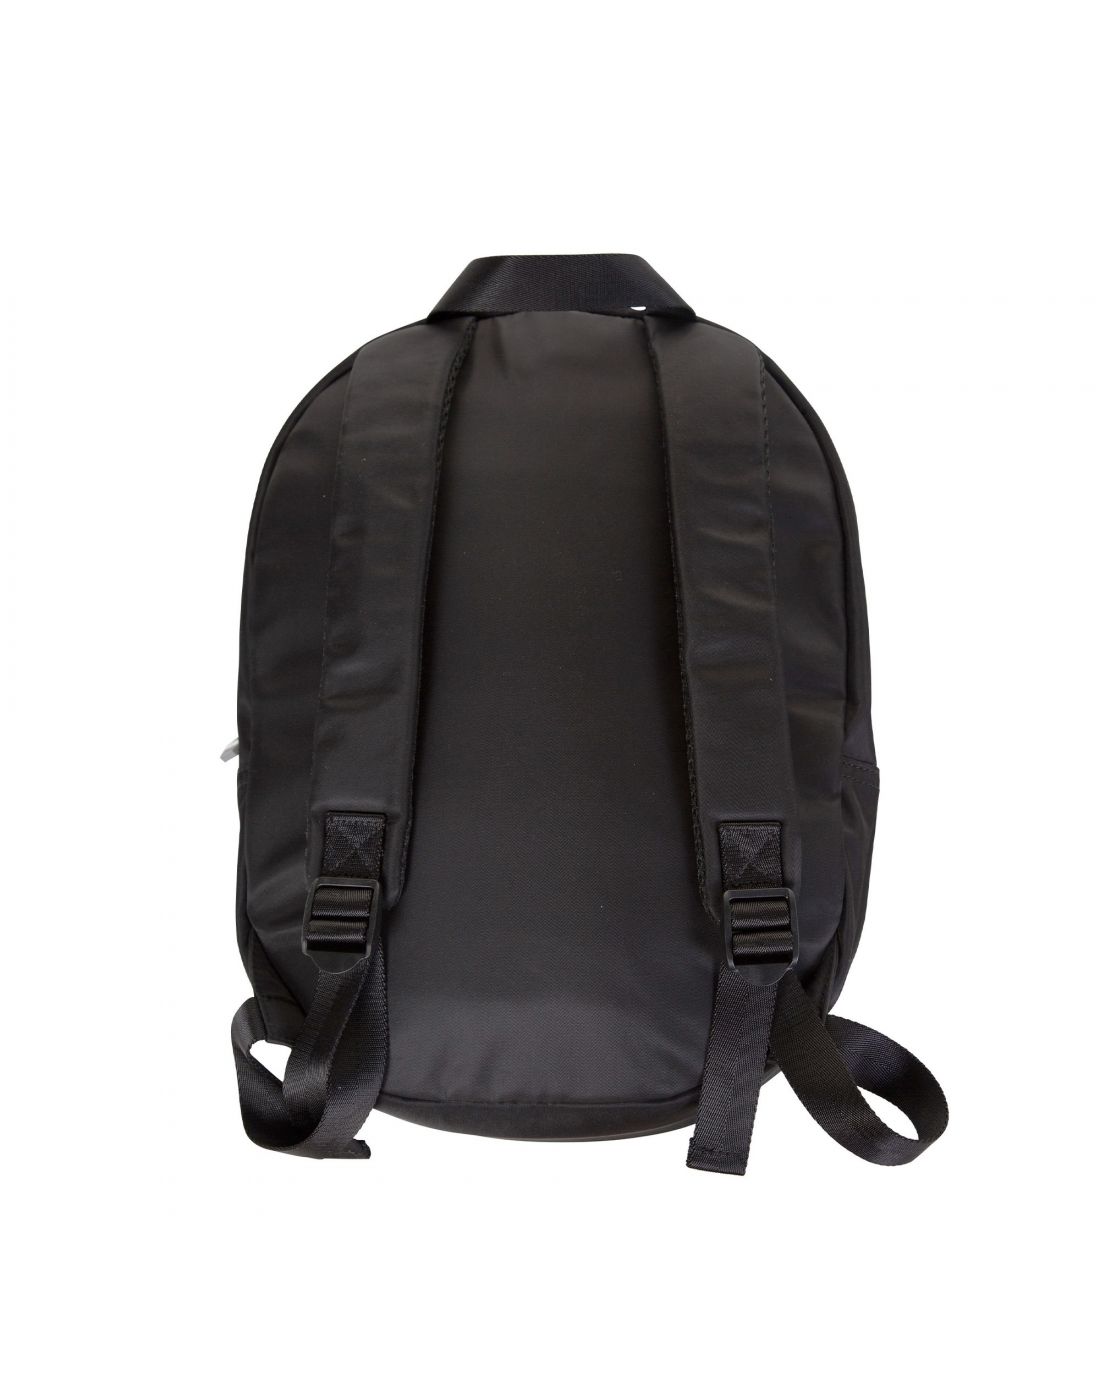 Childhome BackPack ABC Black/Gold